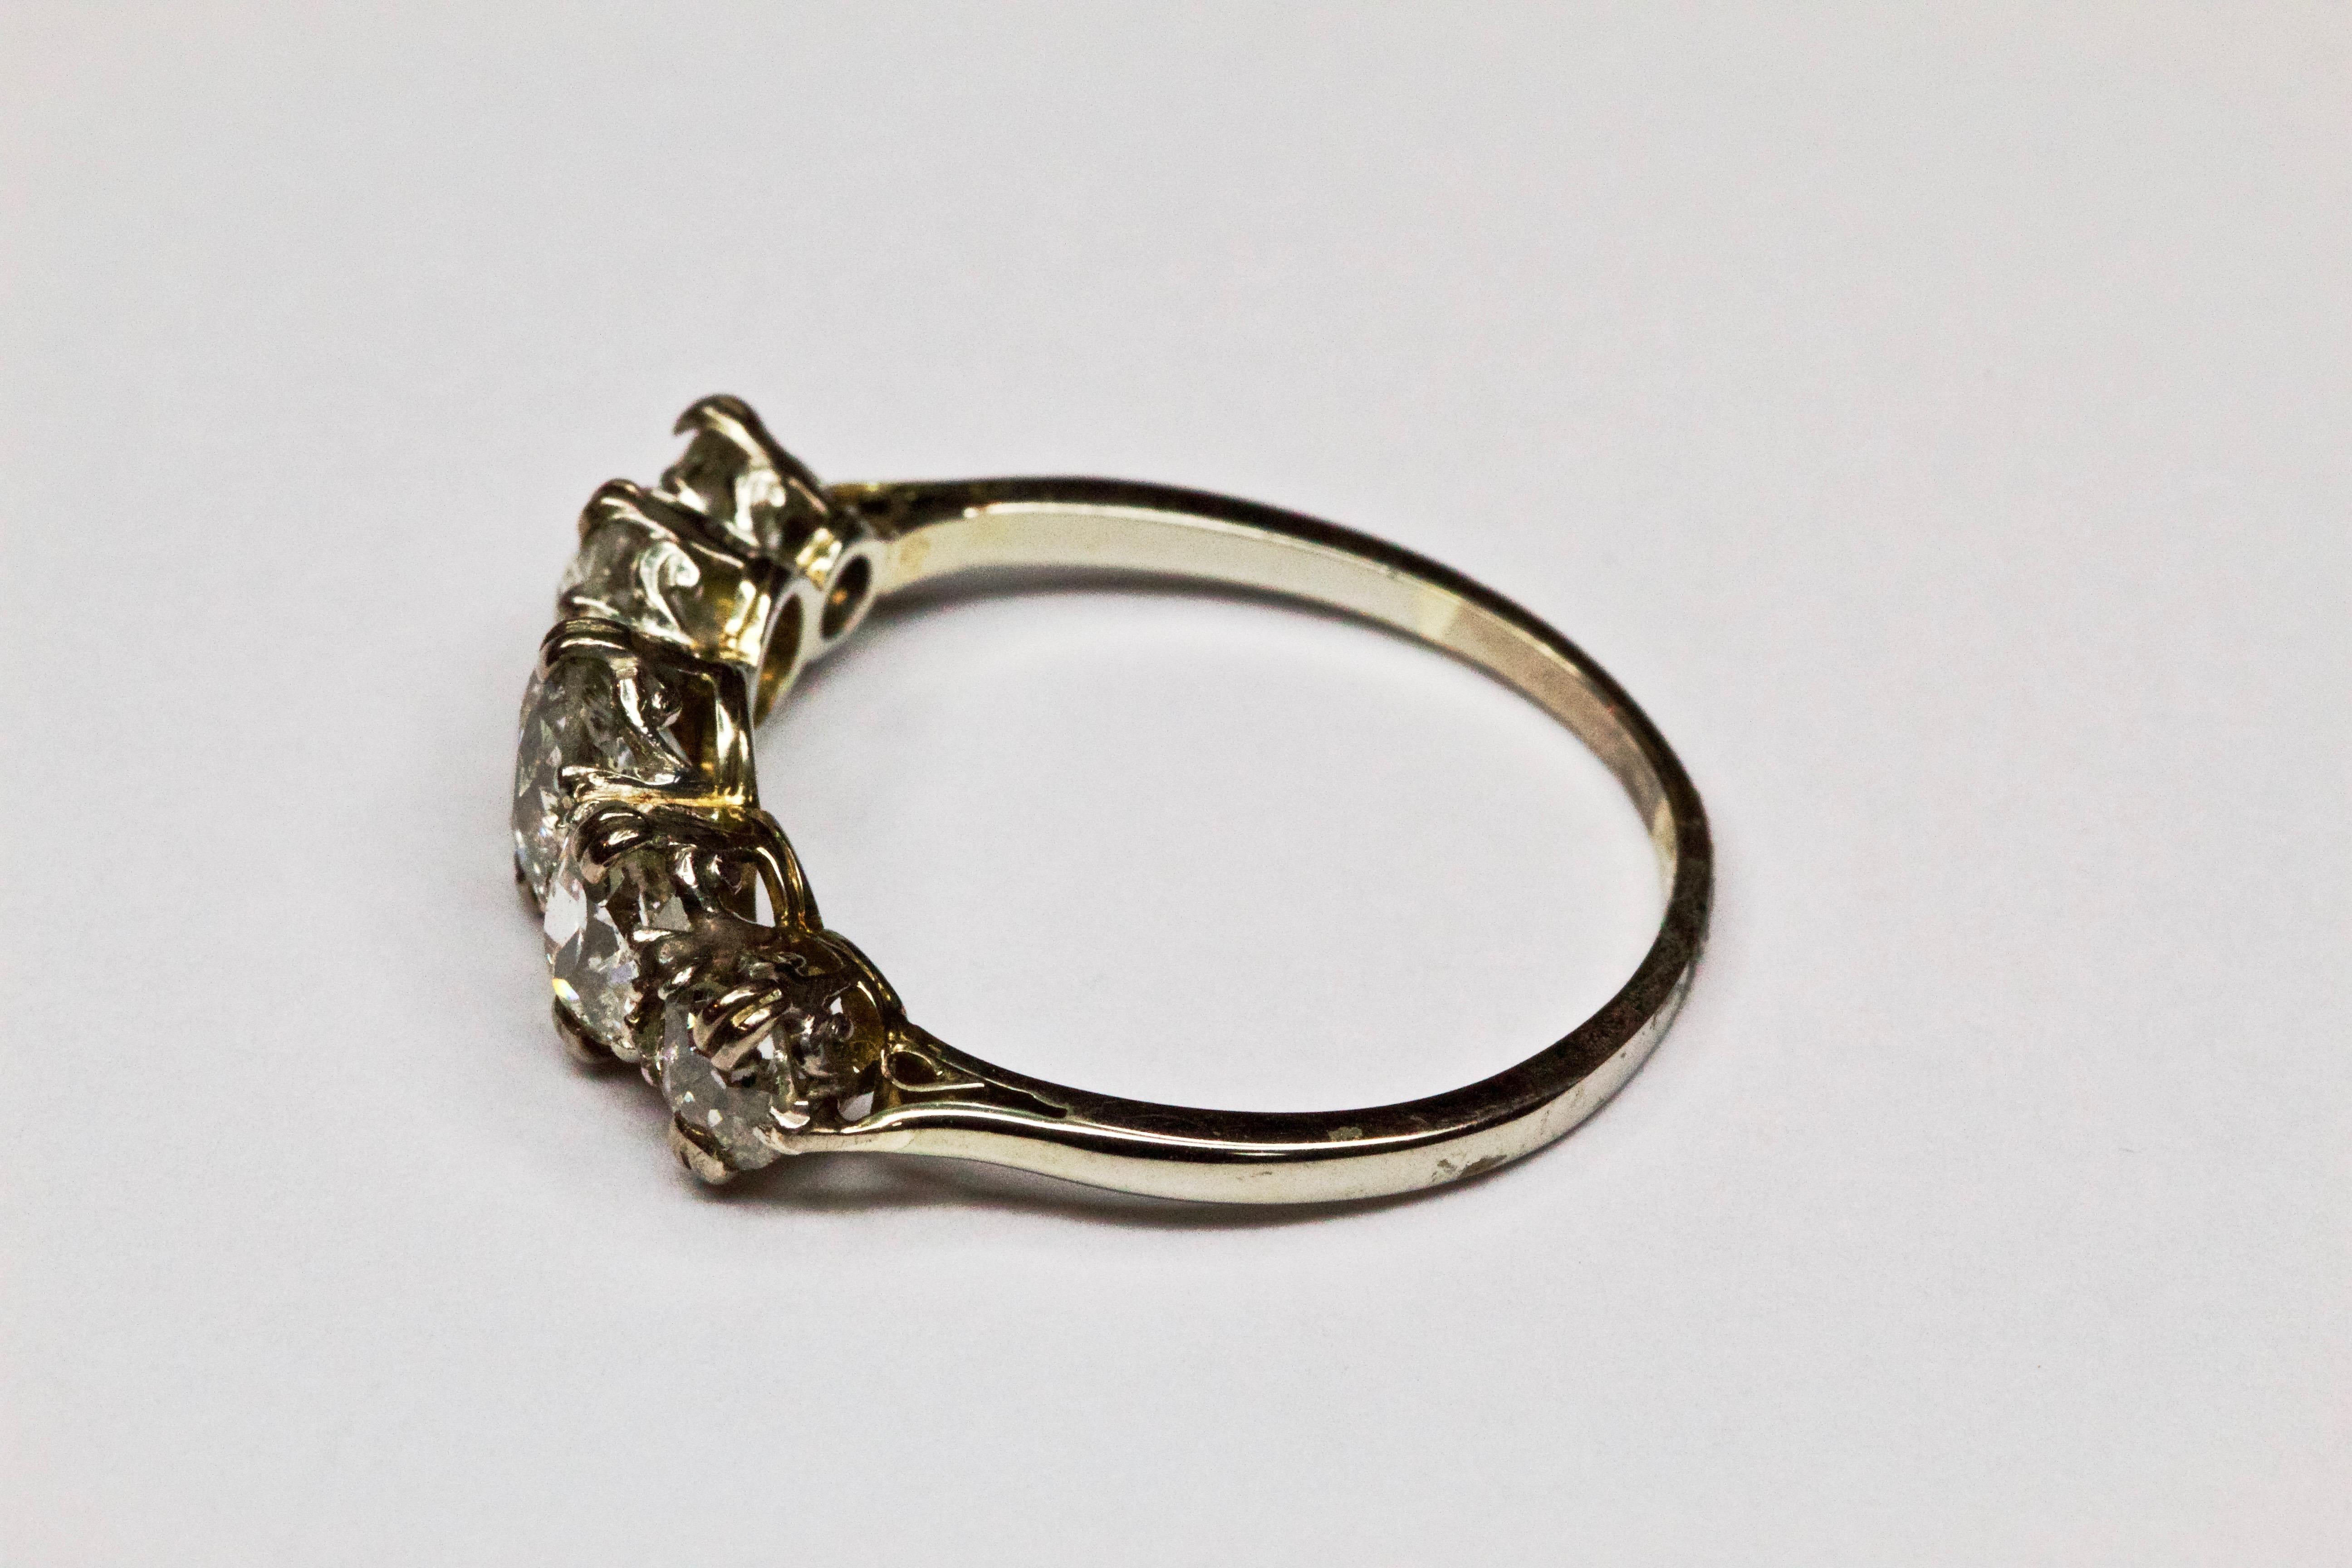 This antique Victorian diamond and platinum ring was handcrafted in England around 1890. This glimmering English ring features five Old European cut diamonds, totalling approximately 1.46 carats. These round precious stones are lined in a row and